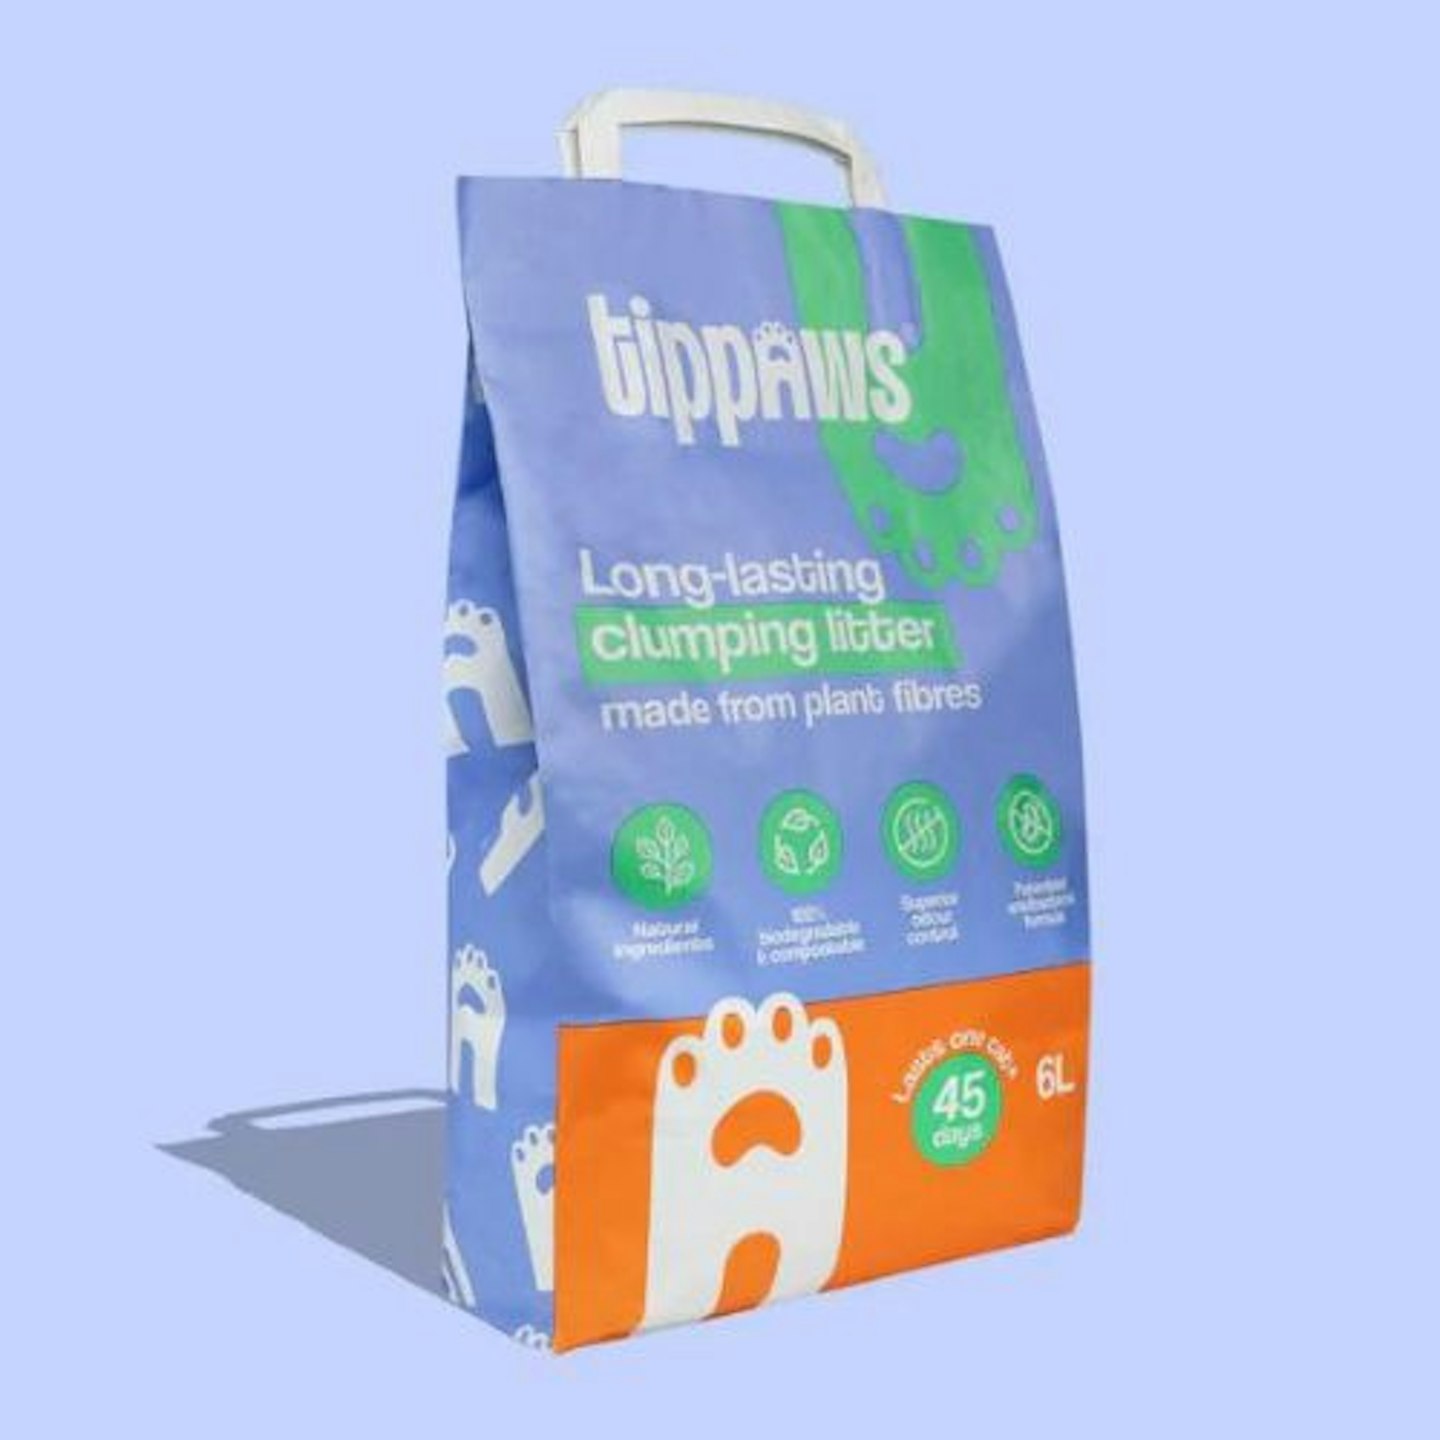 Tippaws Long-Lasting Clumping Litter